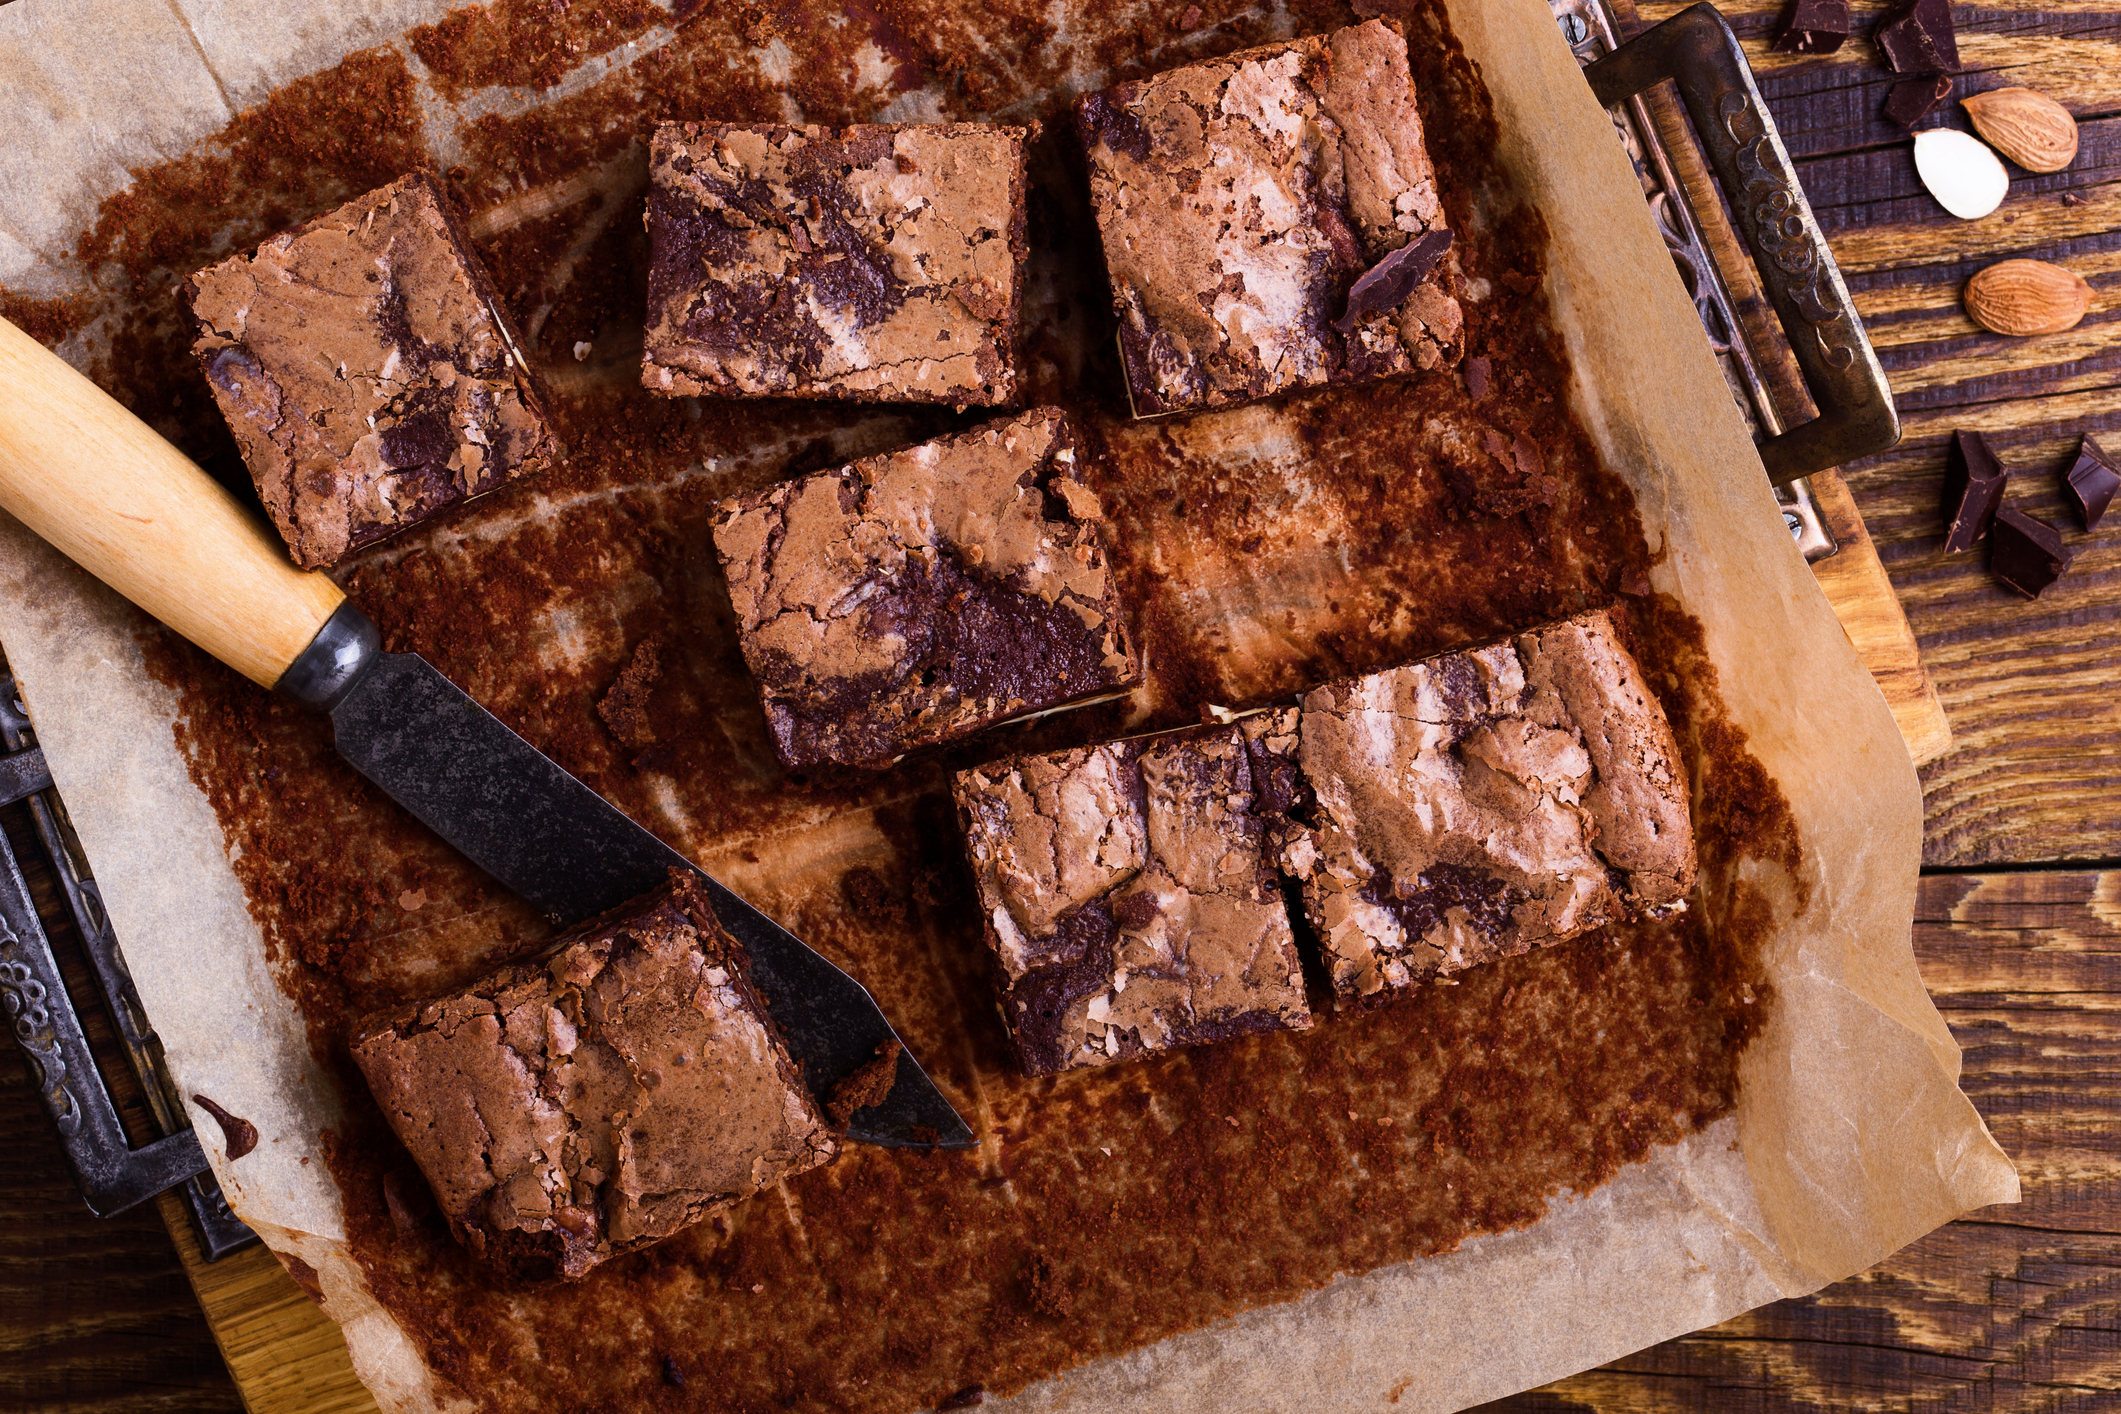 Freshly baked brownies in a pan with a knife, surrounded by scattered nuts and chocolate pieces